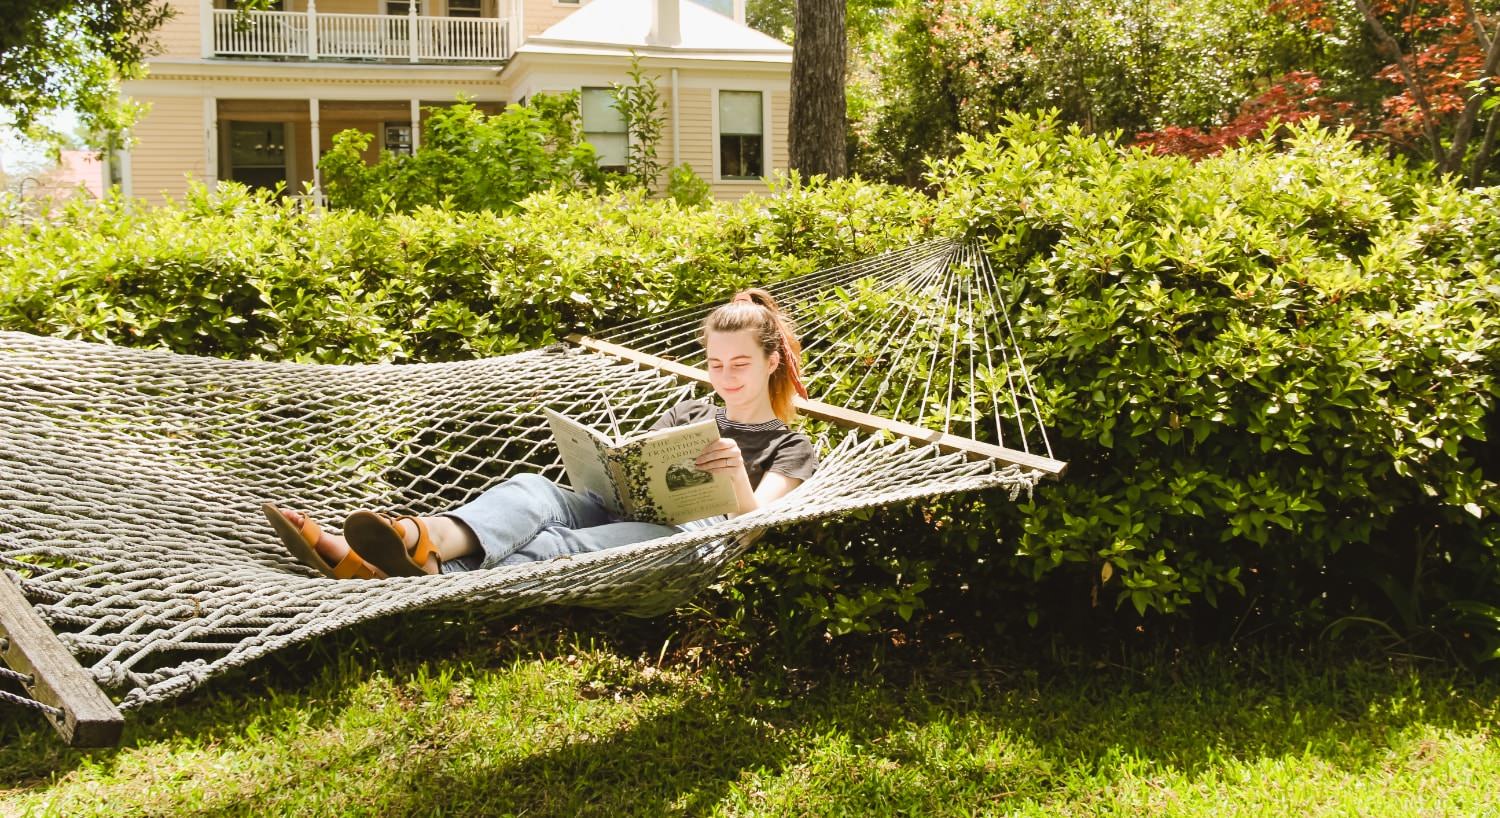 Girl reading a book and relaxing in a large hammock surrounded by green bushes